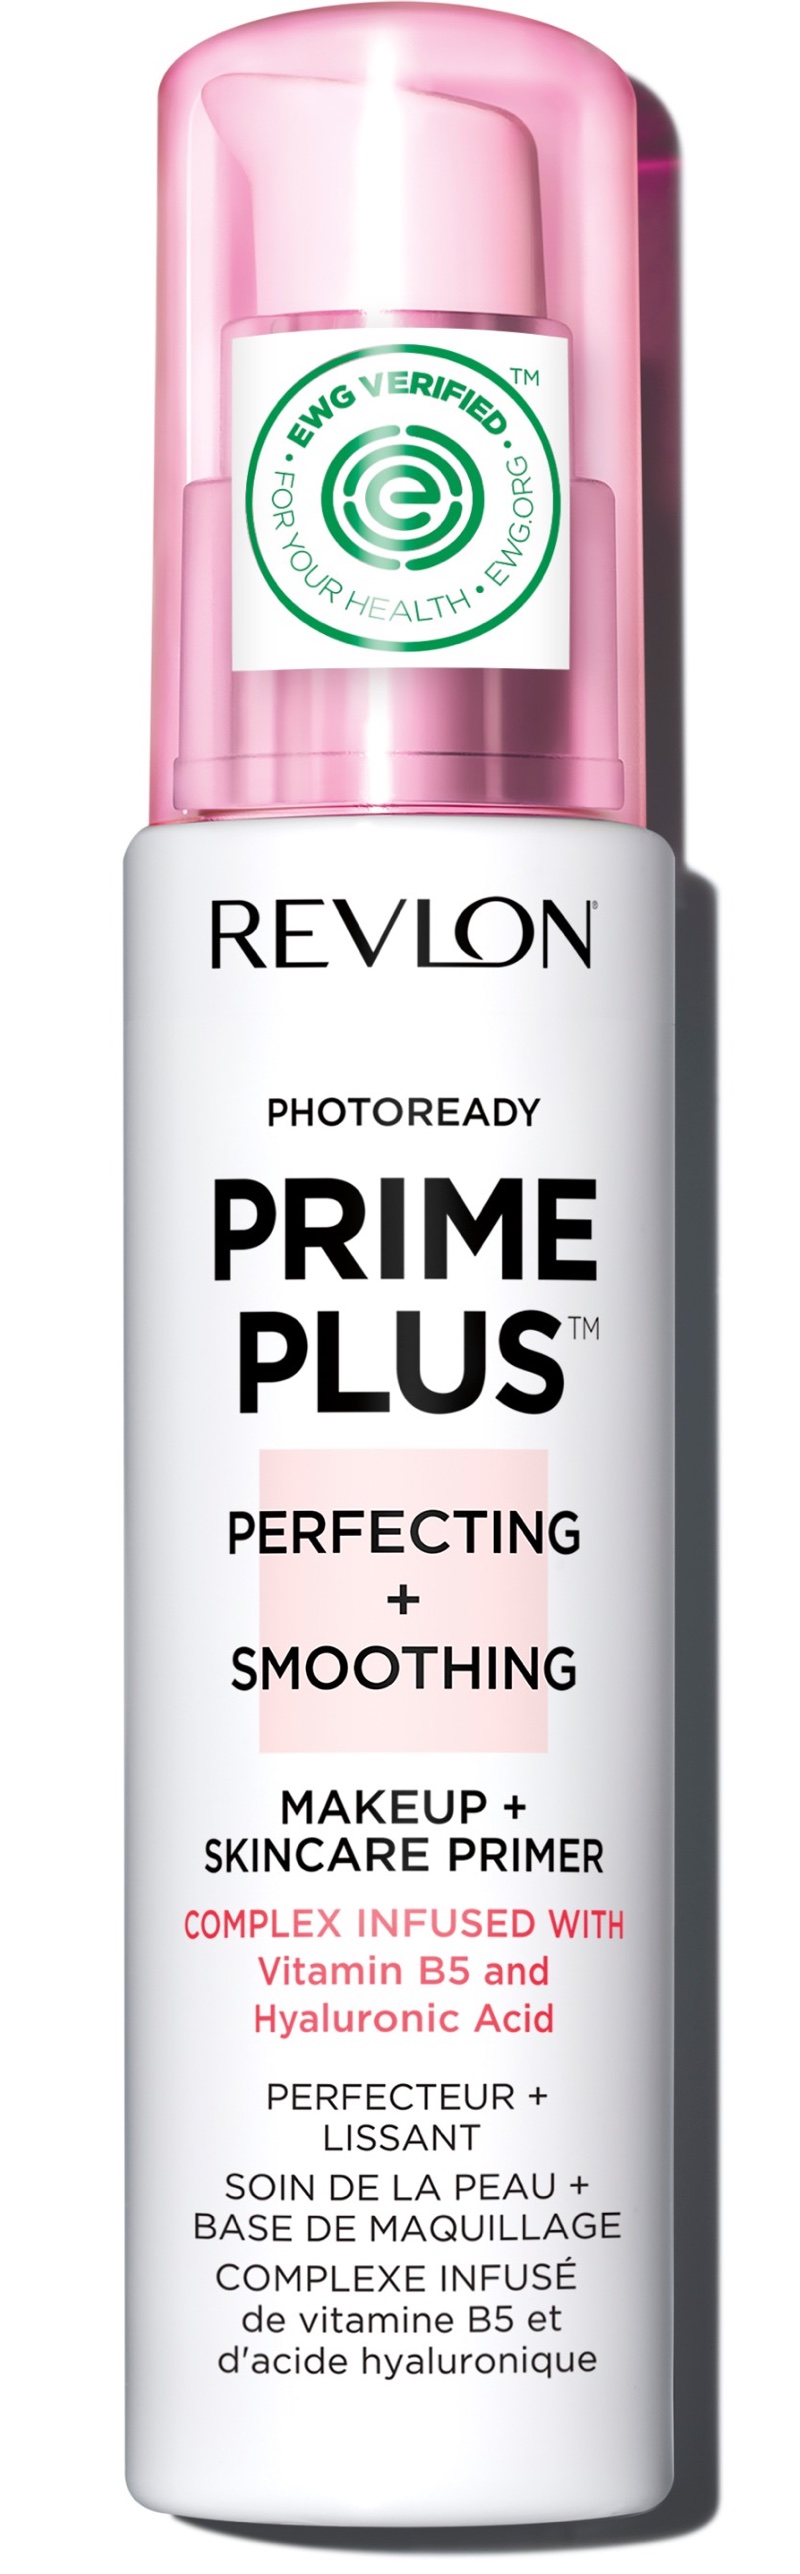 Revlon’s first certified ‘clean’ cosmetics launch under fire for ‘dubious marketing’ claims 
